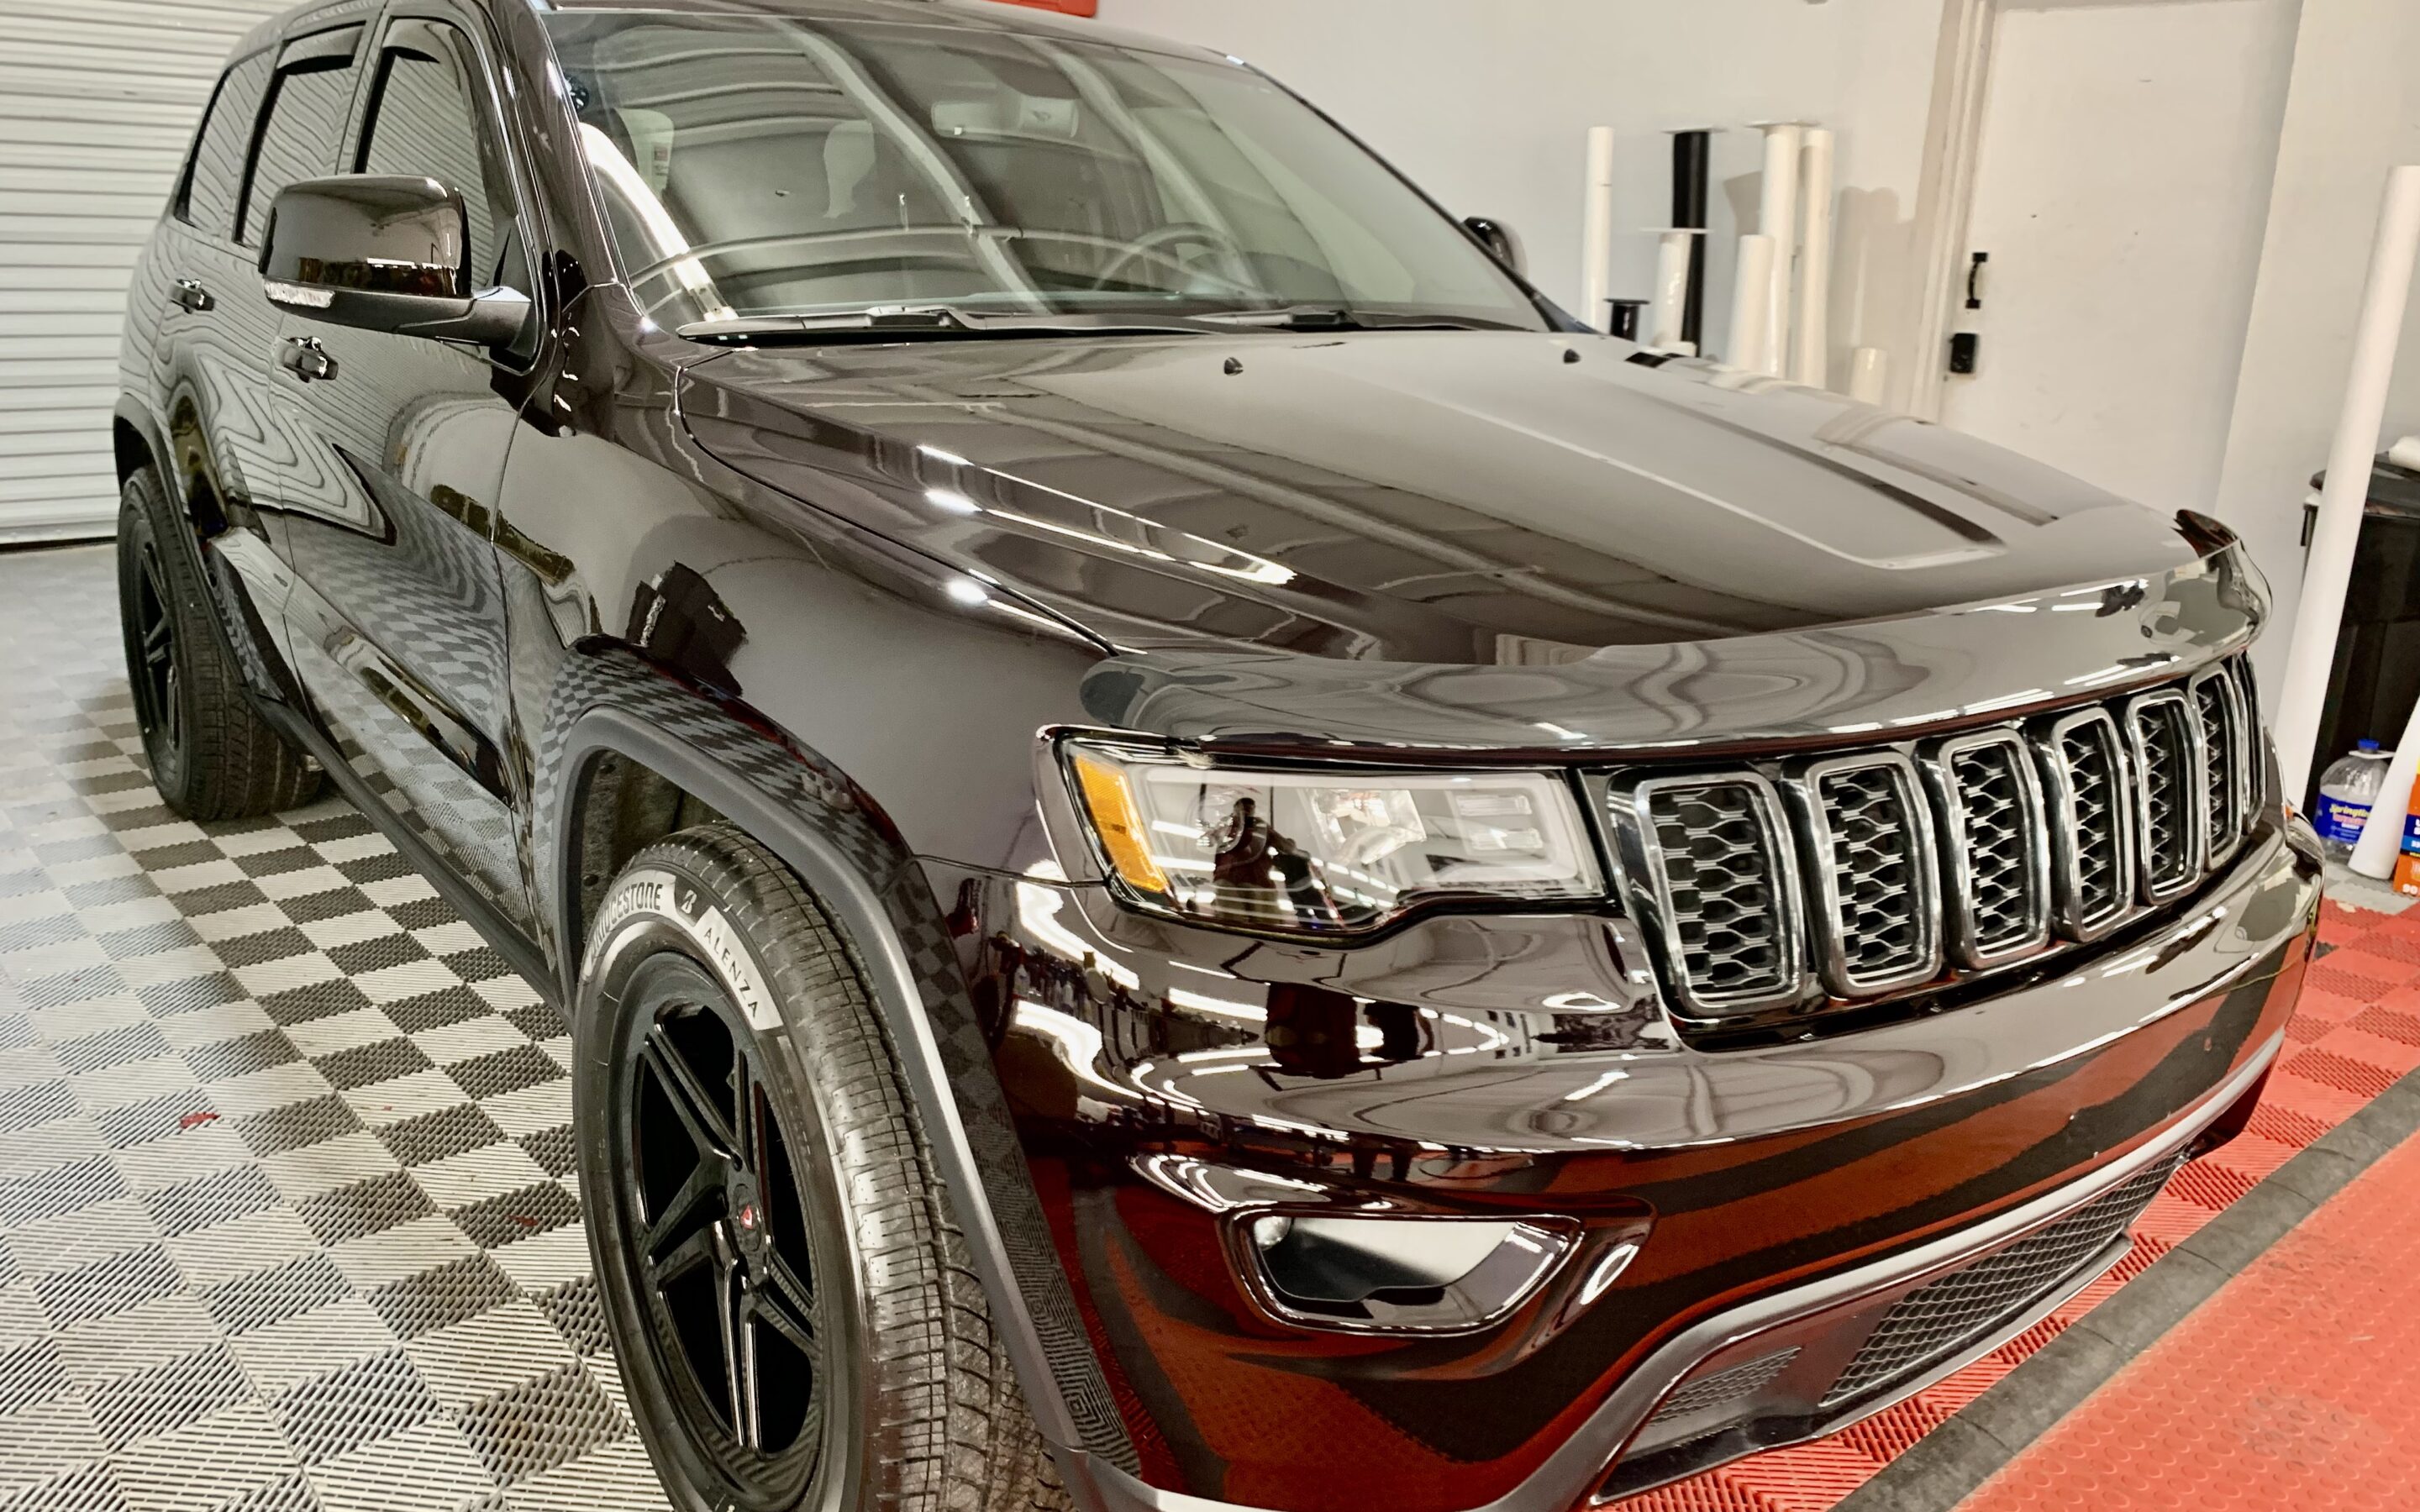 Ceramic Coating of a 2019 Jeep Cherokee